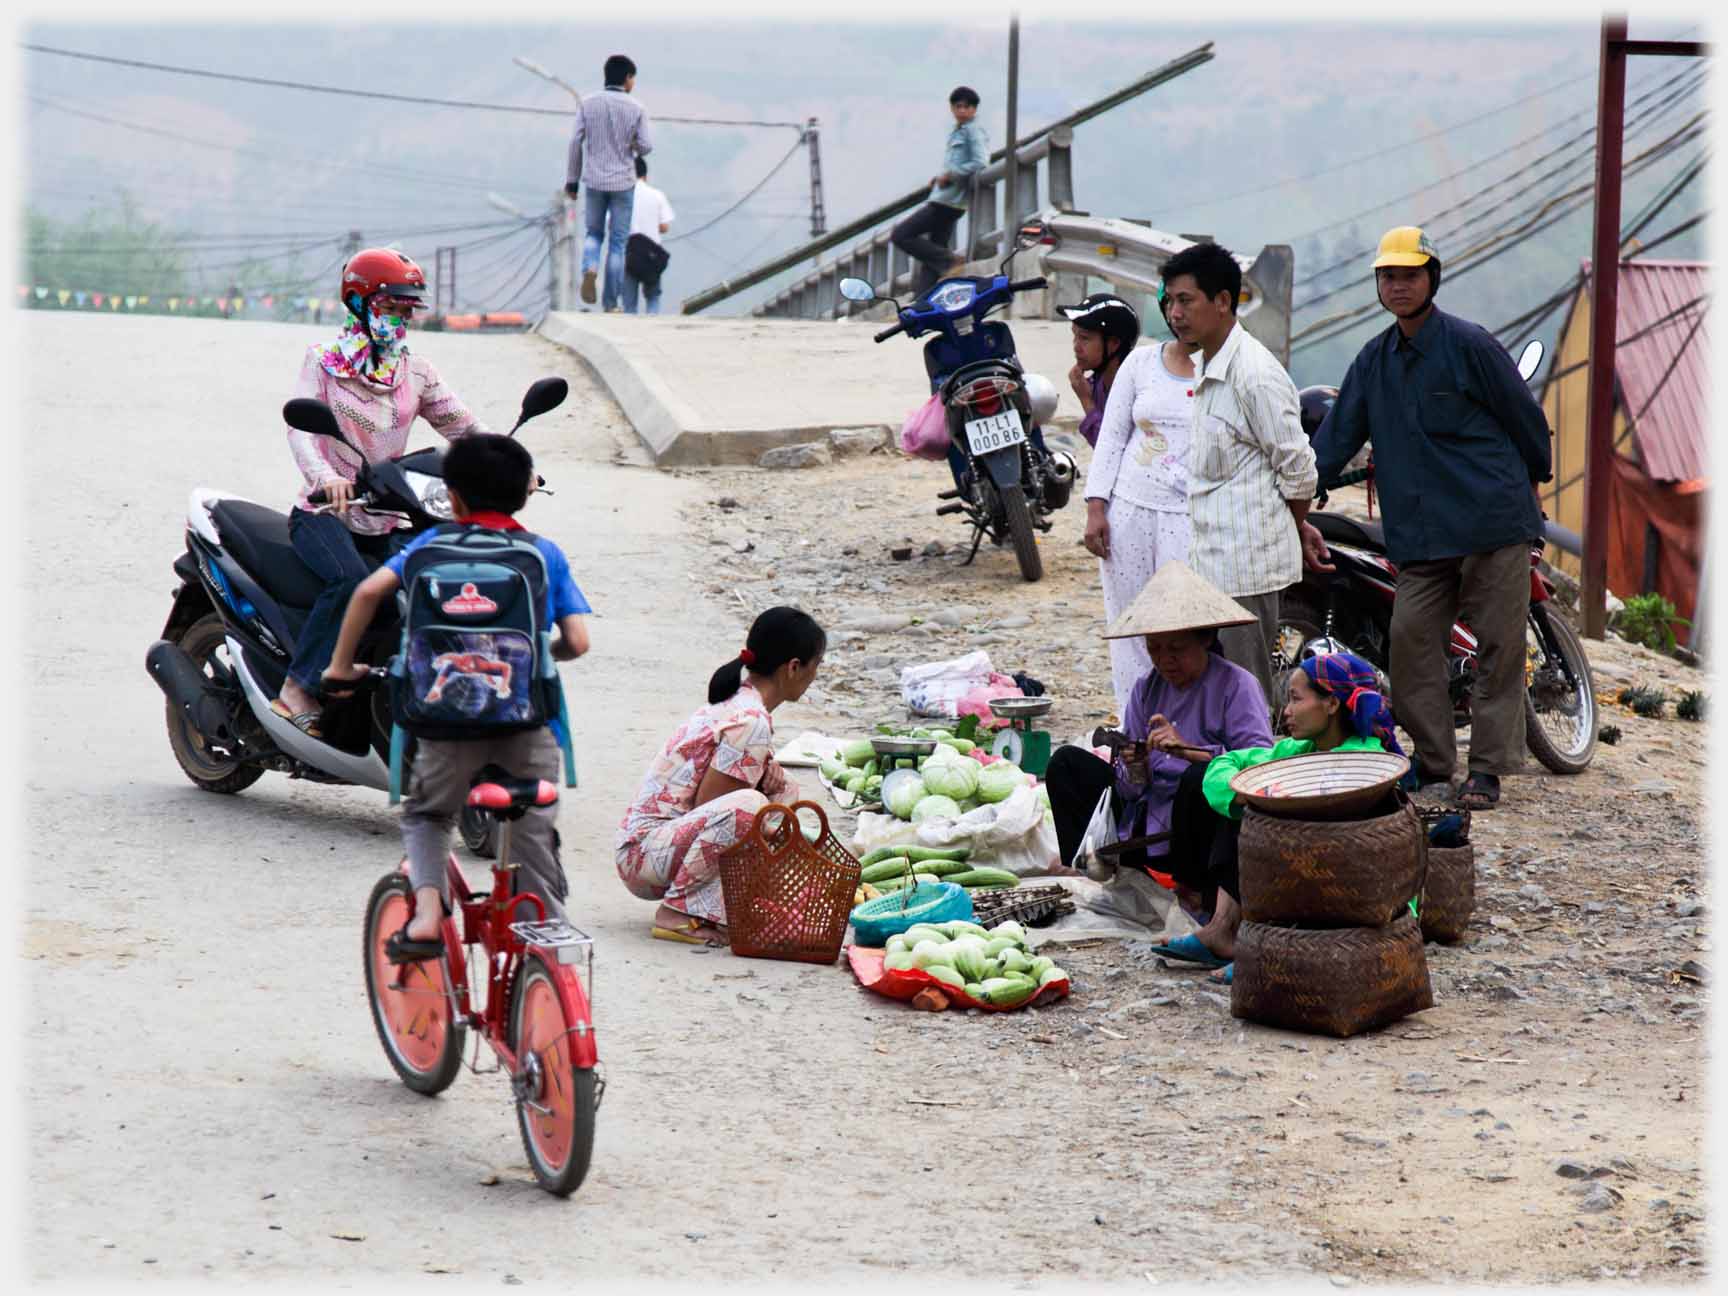 One seller with a number of customers and boy on bike.